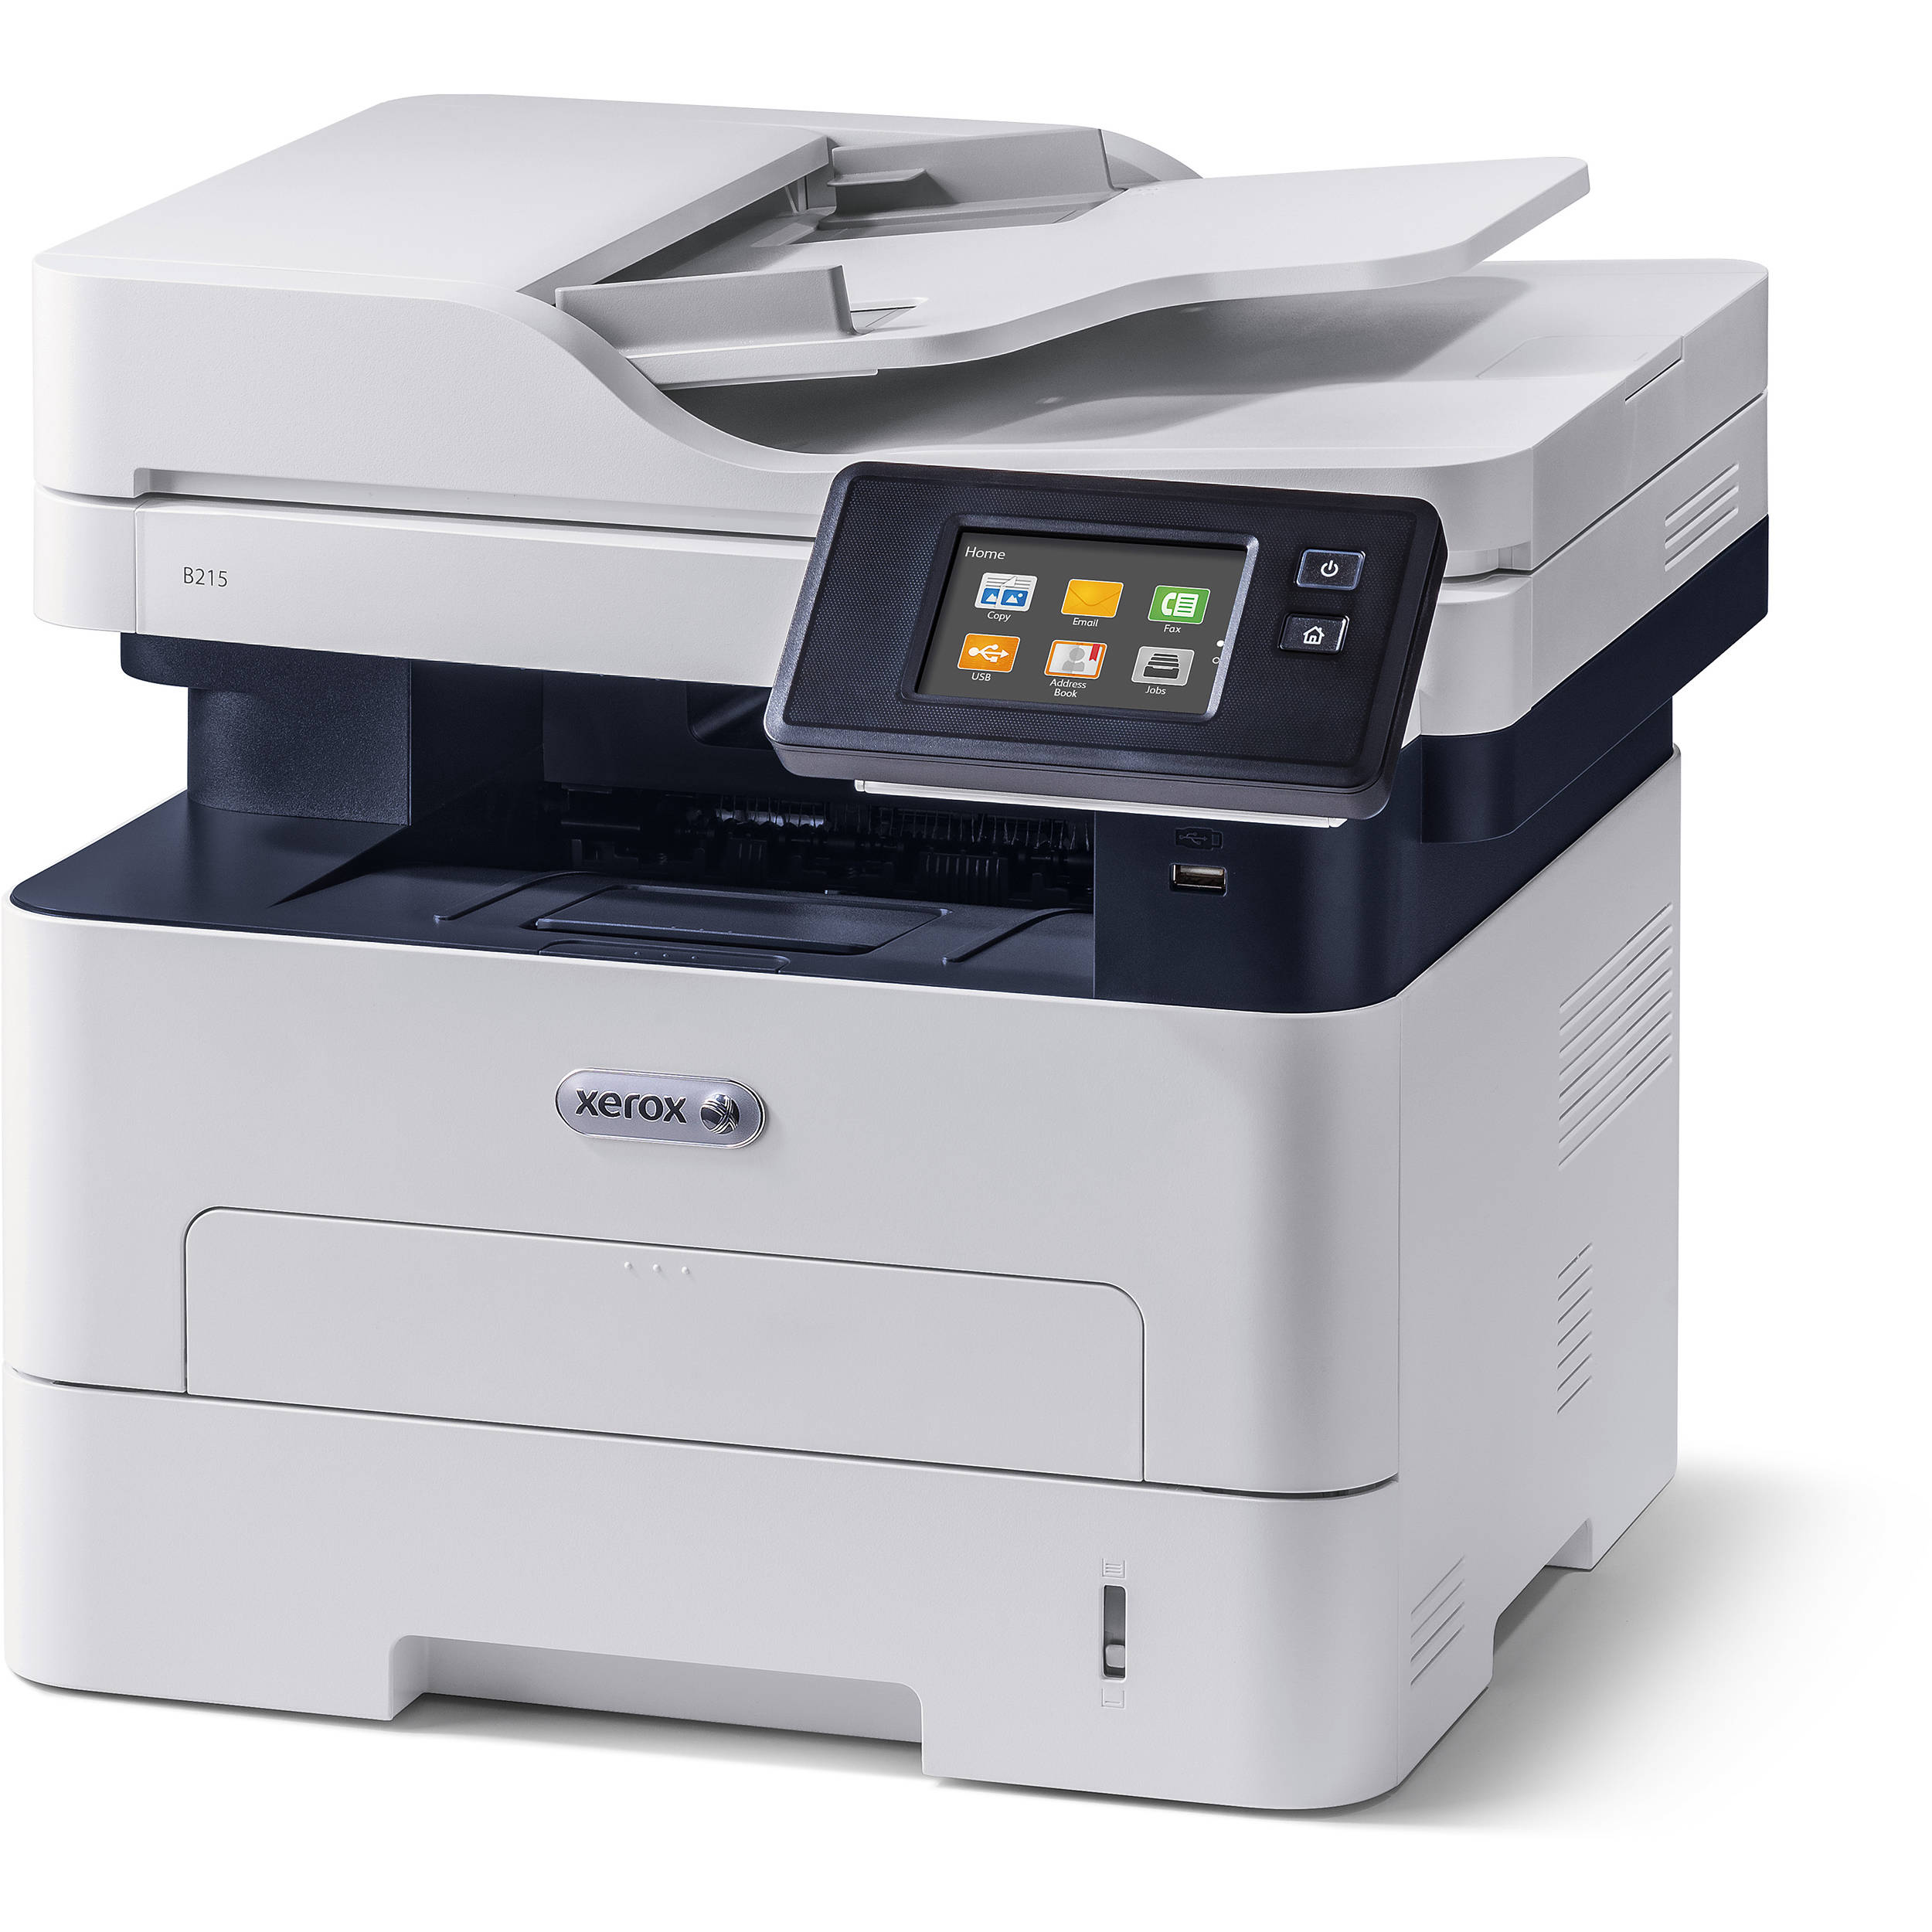 You are currently viewing Top 3 Best Xerox Laser Printers